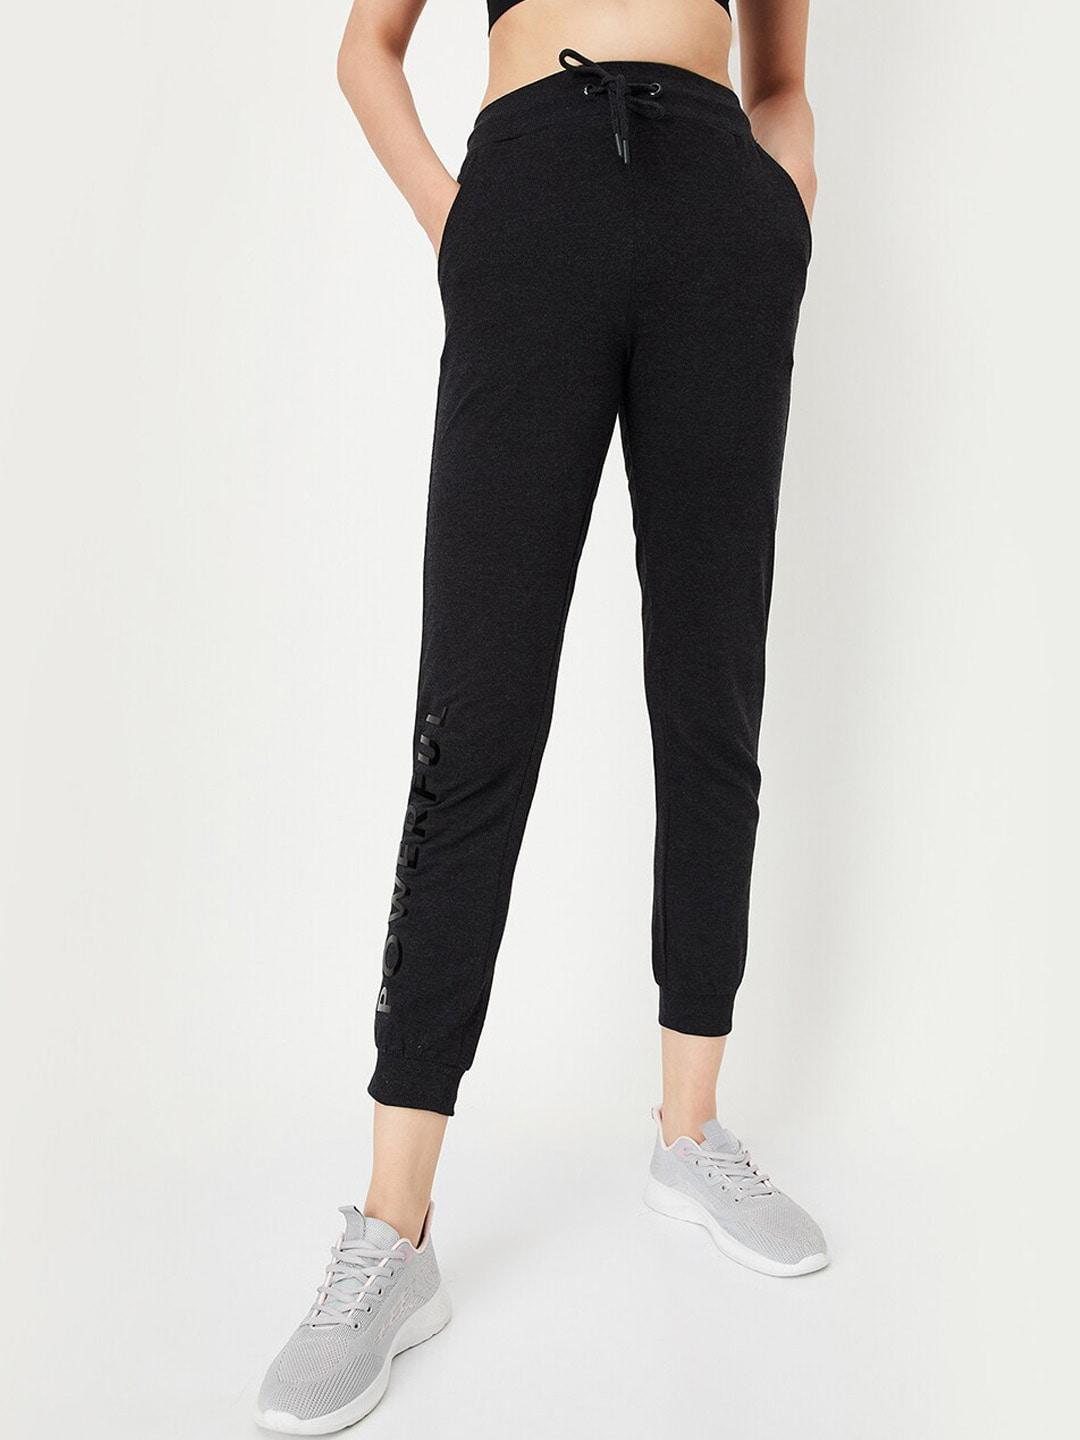 max-women-typography-printed-mid-rise-gym-joggers